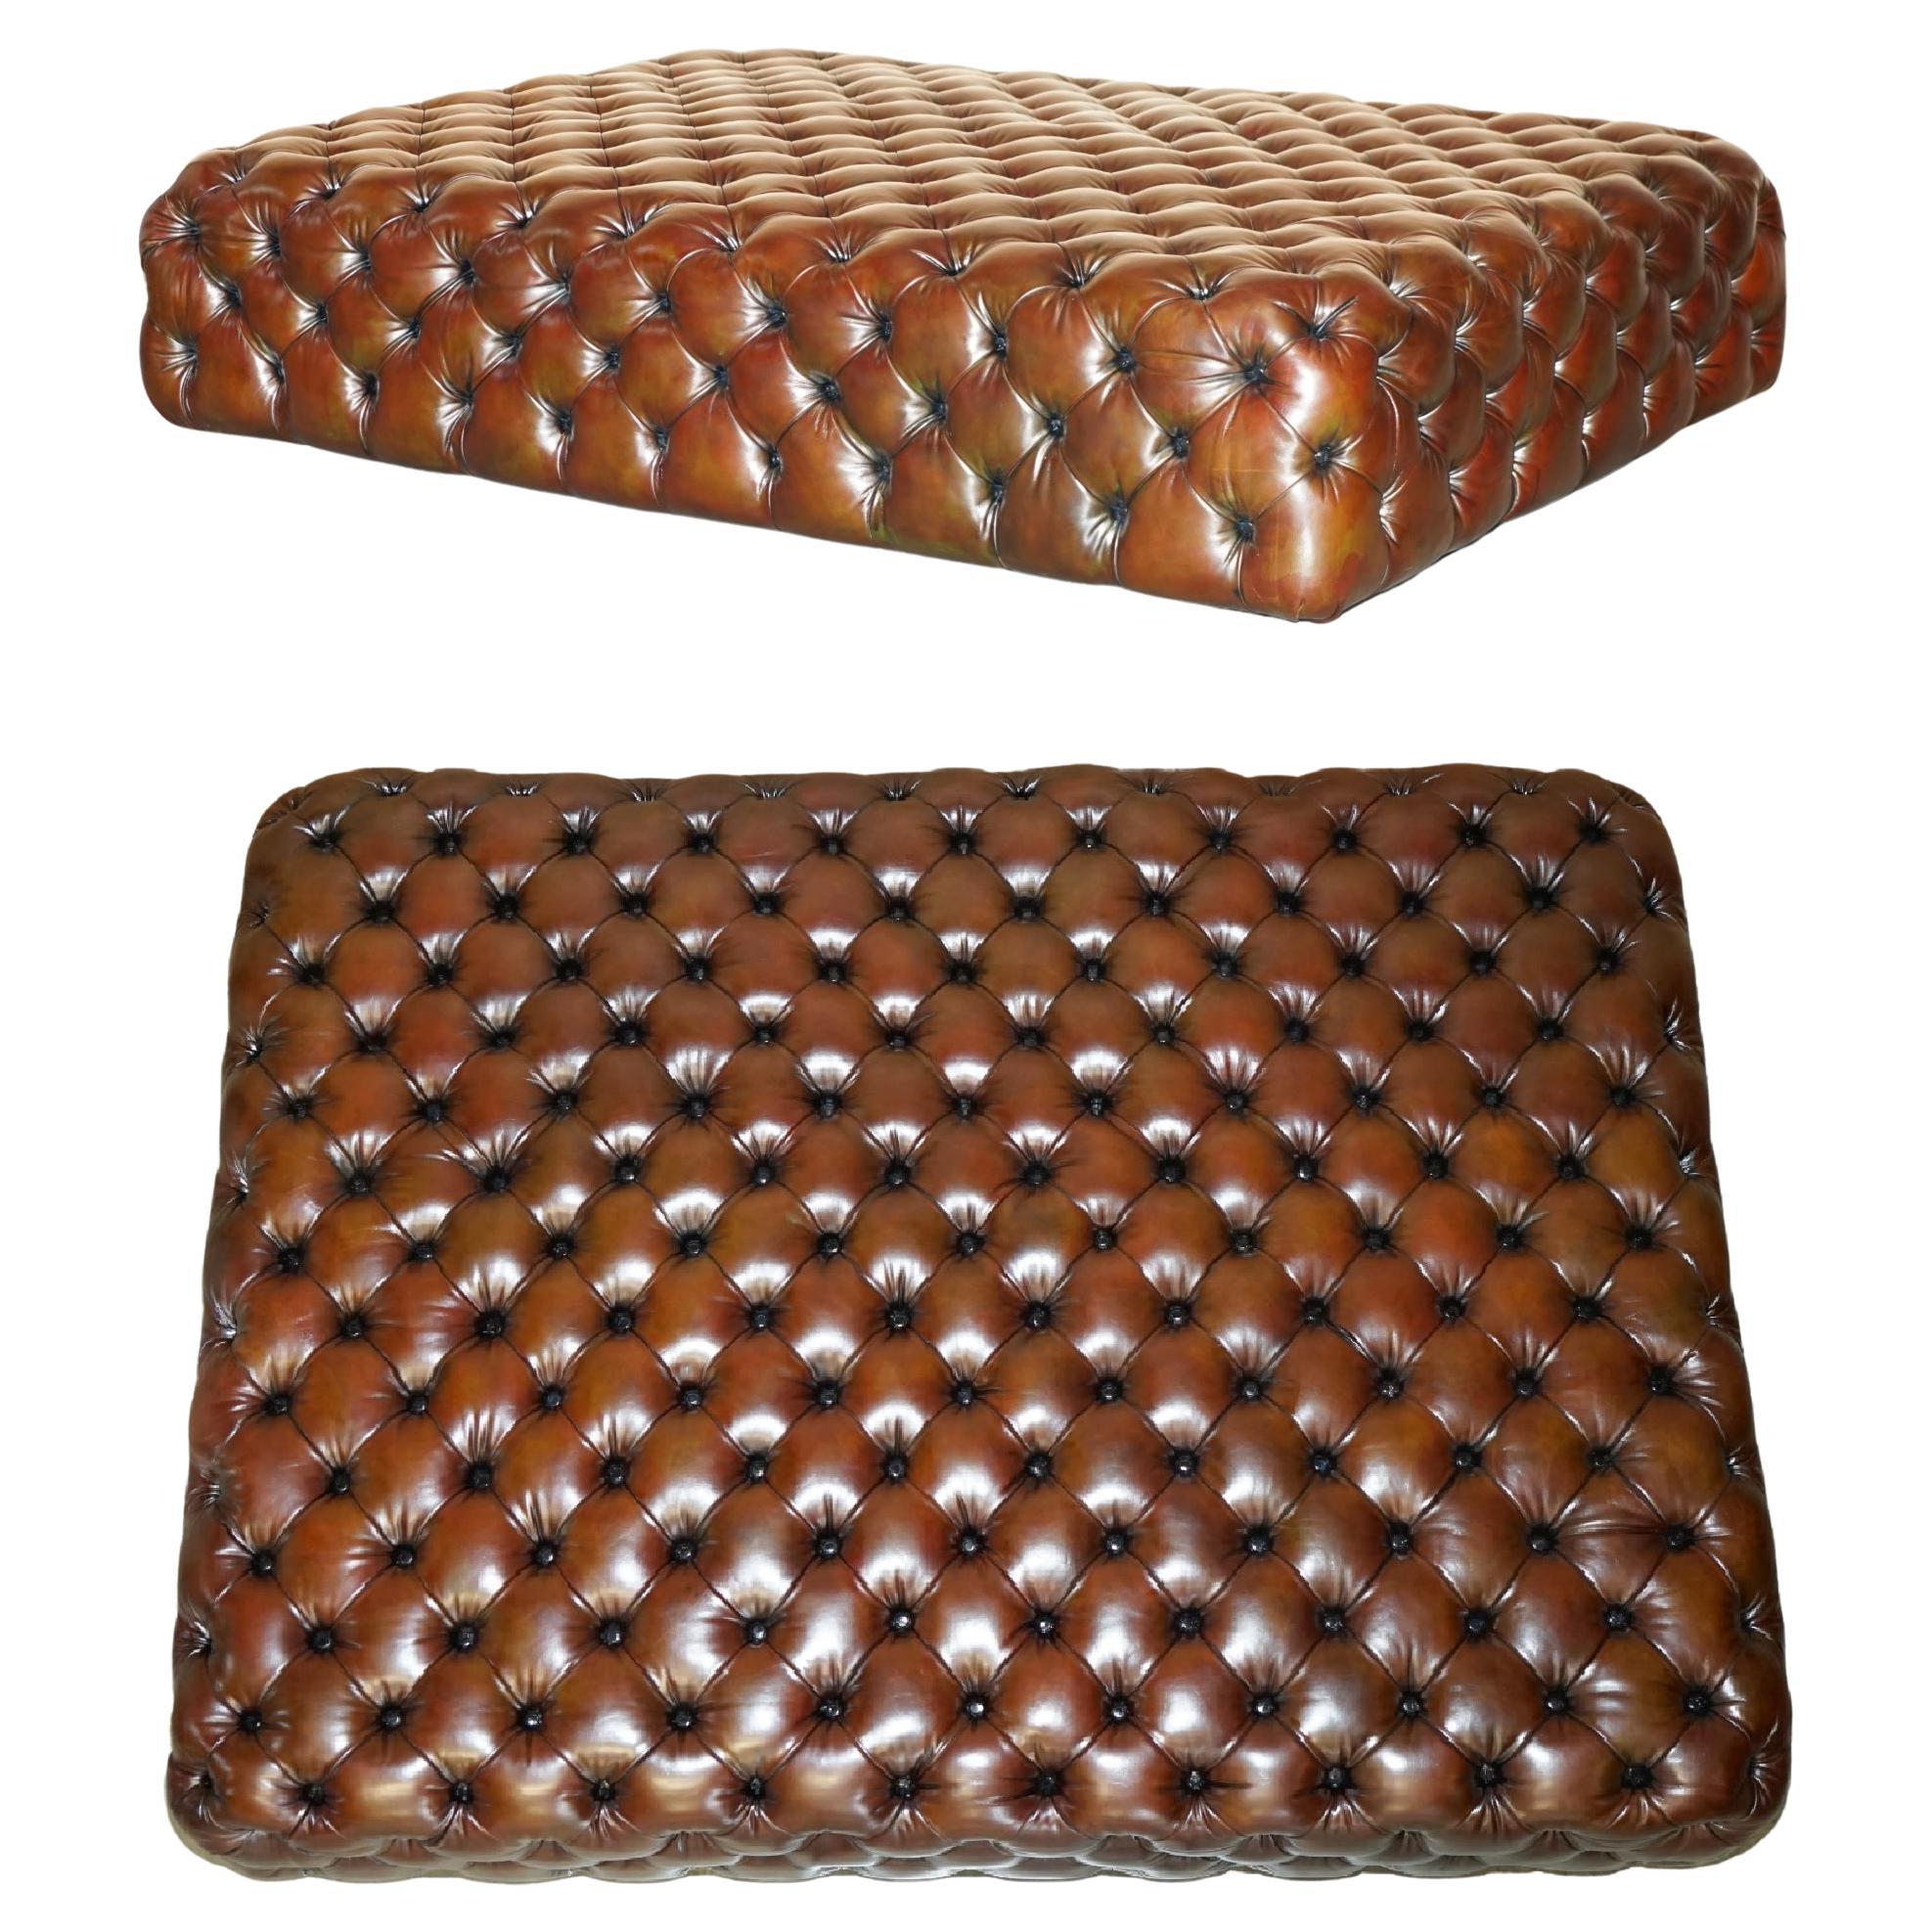 MONUMENTAL GEORGE SMITH RESTORED BROWN LEATHER CHESTERFiELD FOOTSTOOL OTTOMAN For Sale